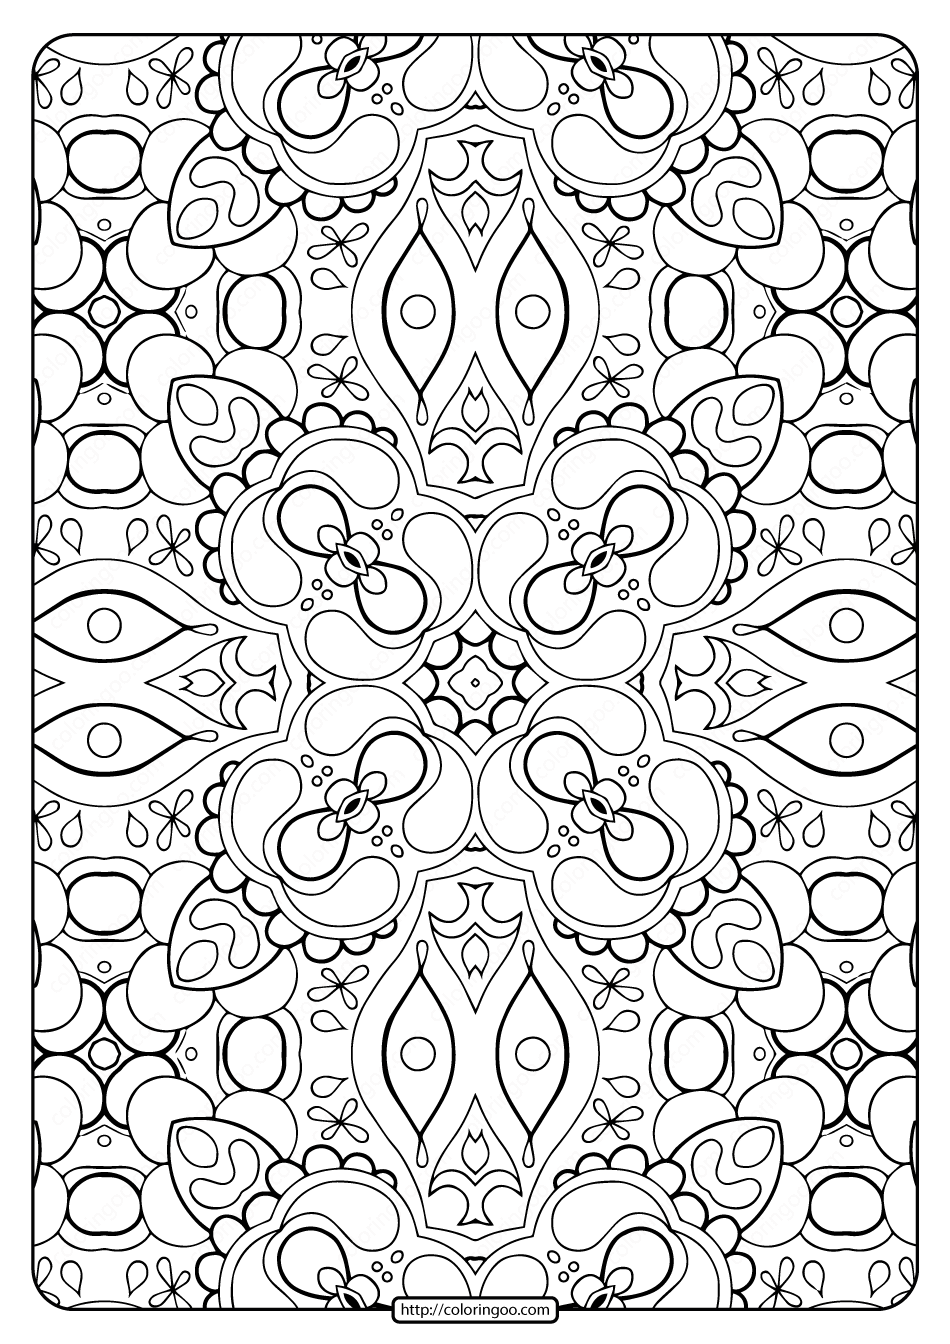 Printable Abstract Pattern Adult Coloring Pages-01